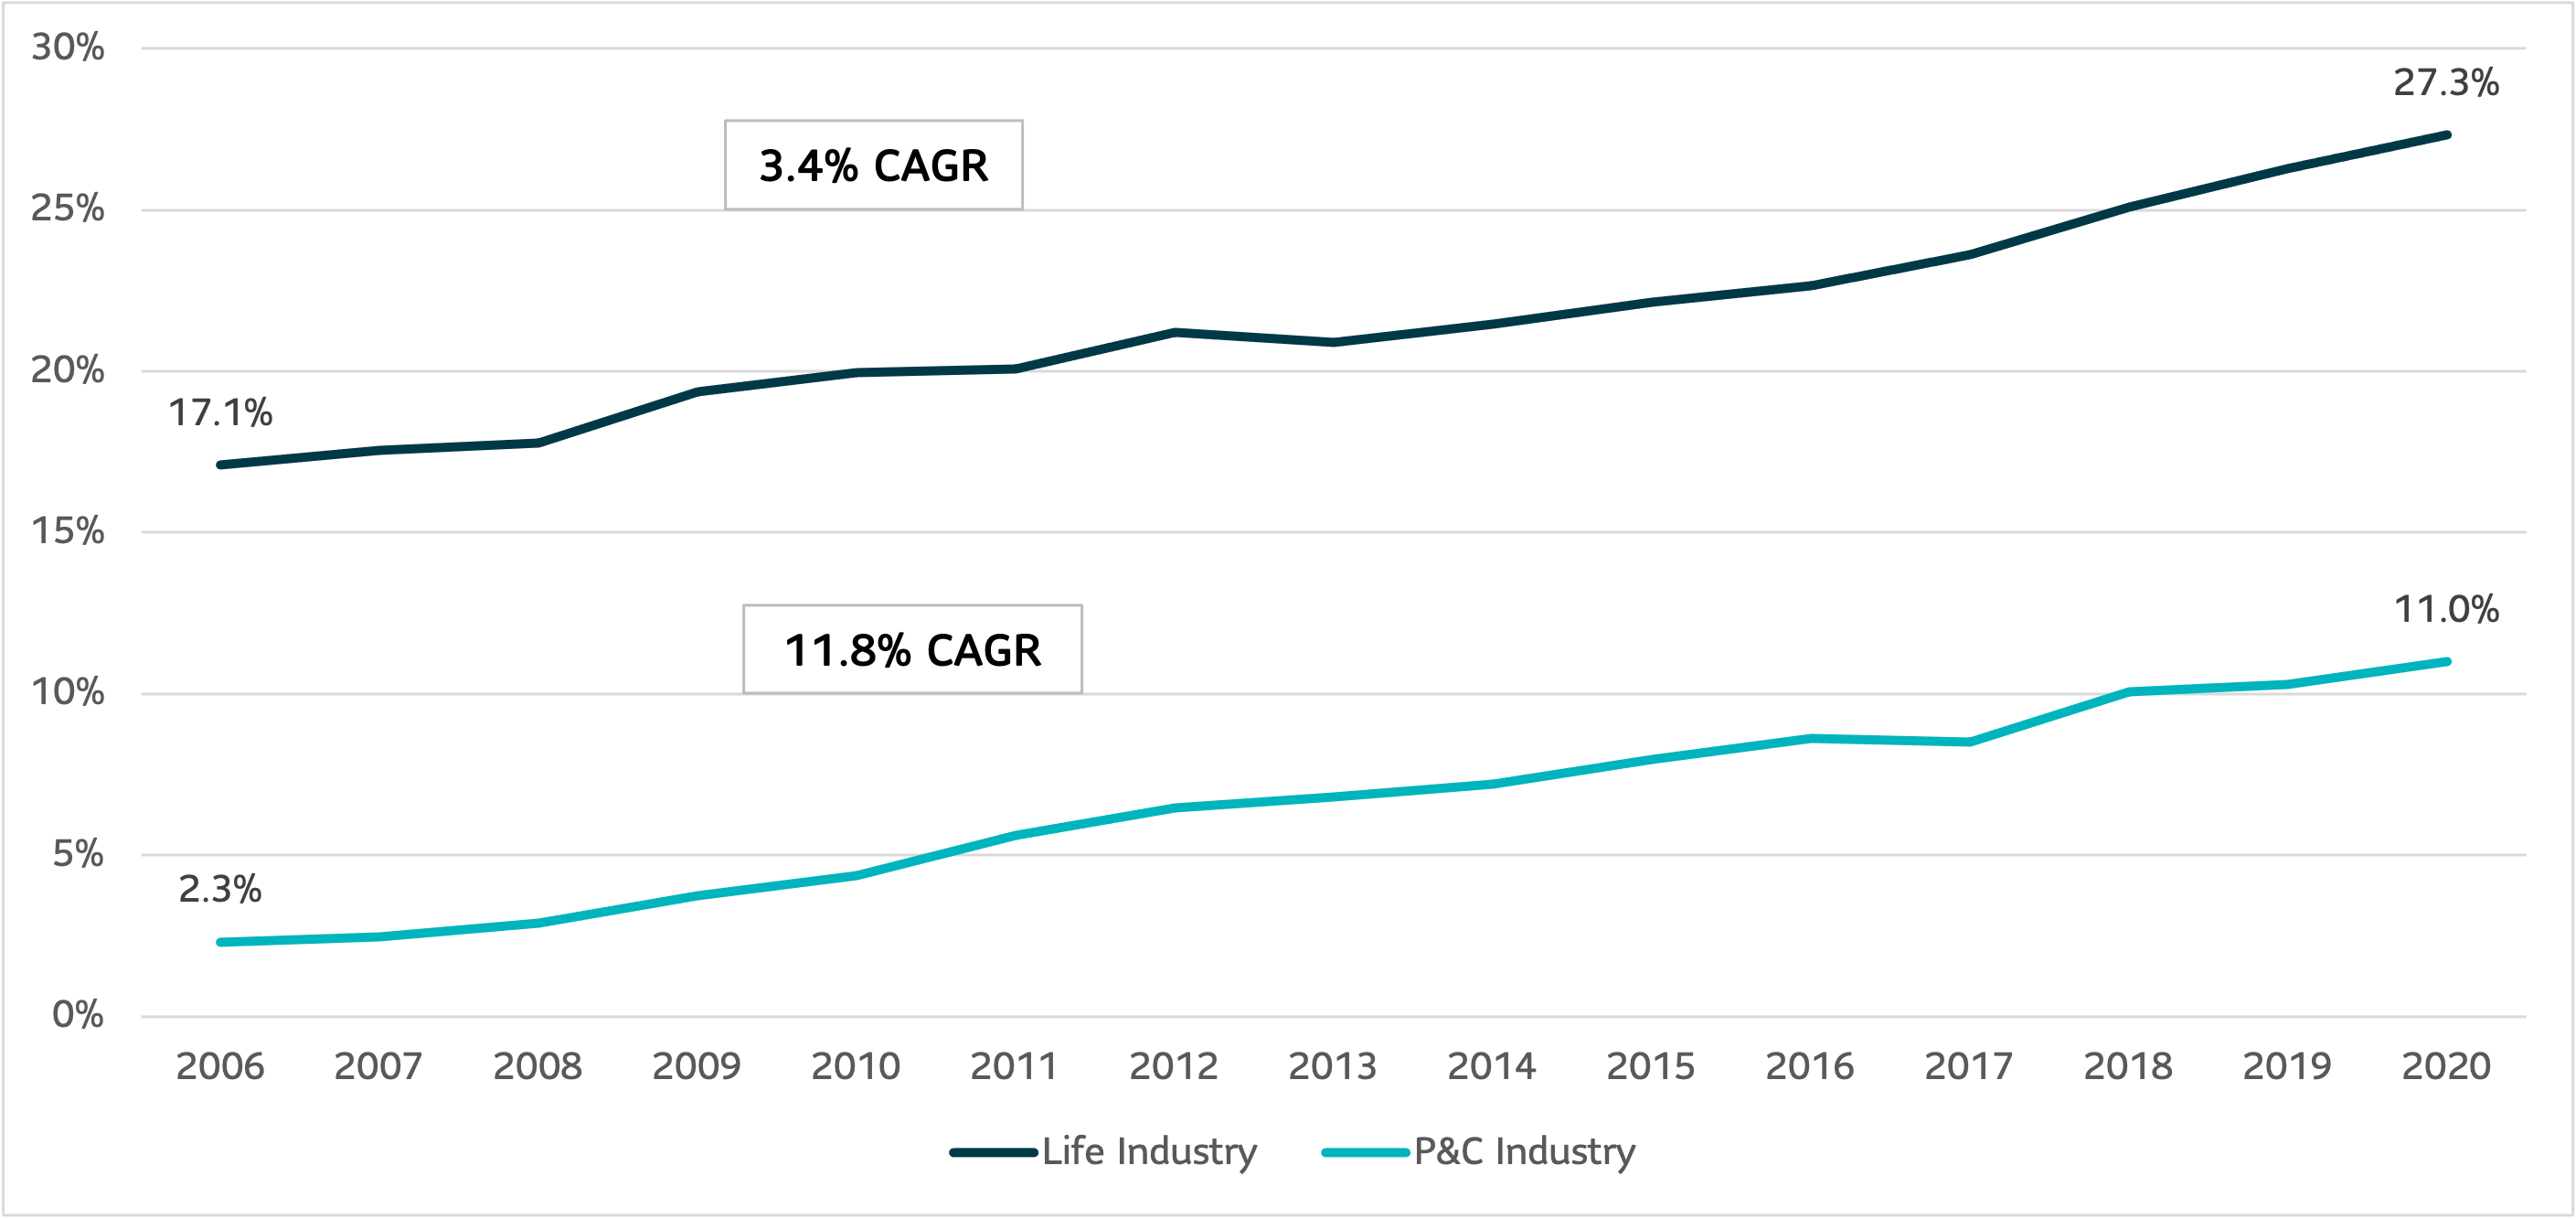 The graph shows the growth of private bonds in insurance company portfolios. Private bonds in insurance portfolios increased from 17.1% in 2006 to 27.3% in 2020 with a CAGR of 3.4%. Private bonds in the P&C industry increased from 2.3% in 2006 to 11.0% in 2020 with a CAGR of 11.8%. 